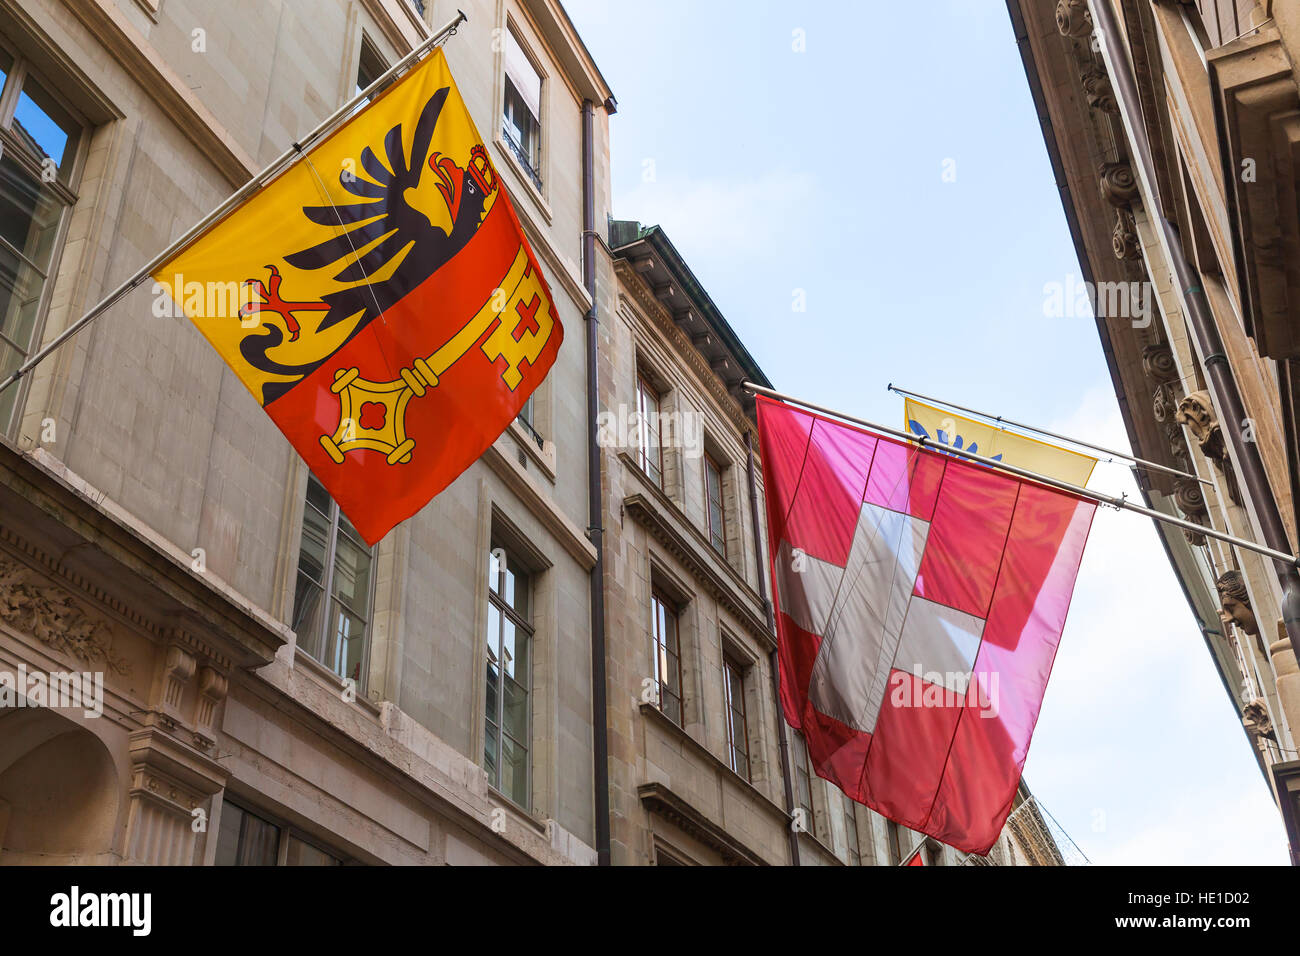 Geneva, Switzerland. Swiss National and City flags mounted on old house wall Stock Photo